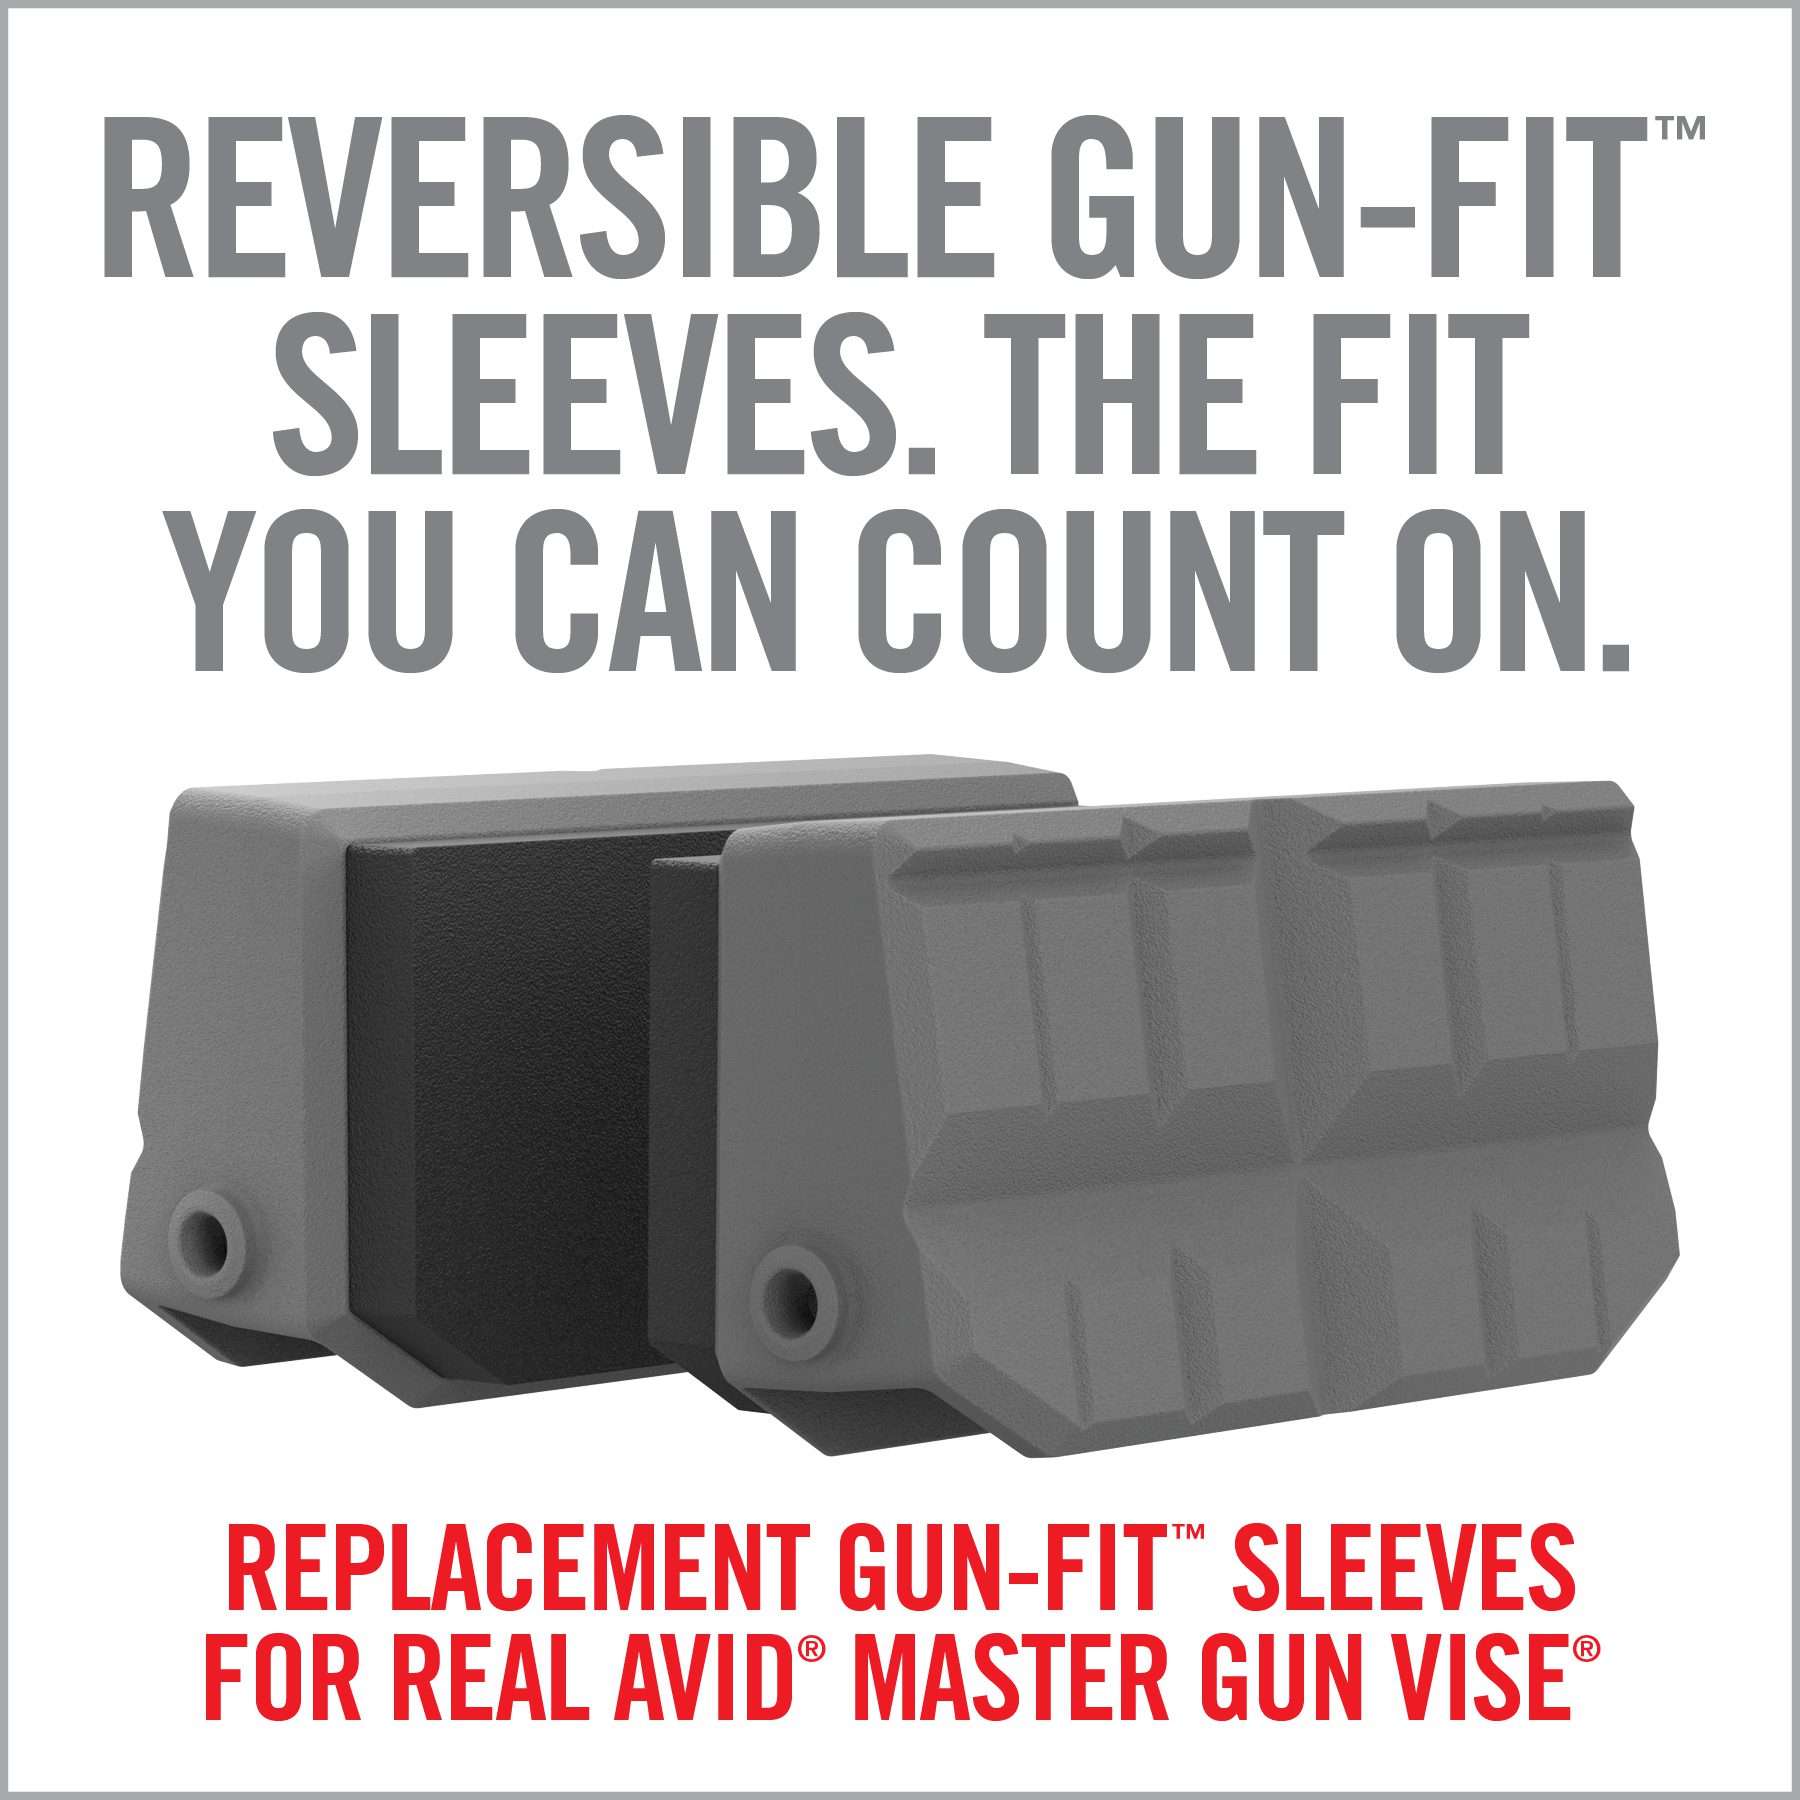 an advertisement for the gun - fit system